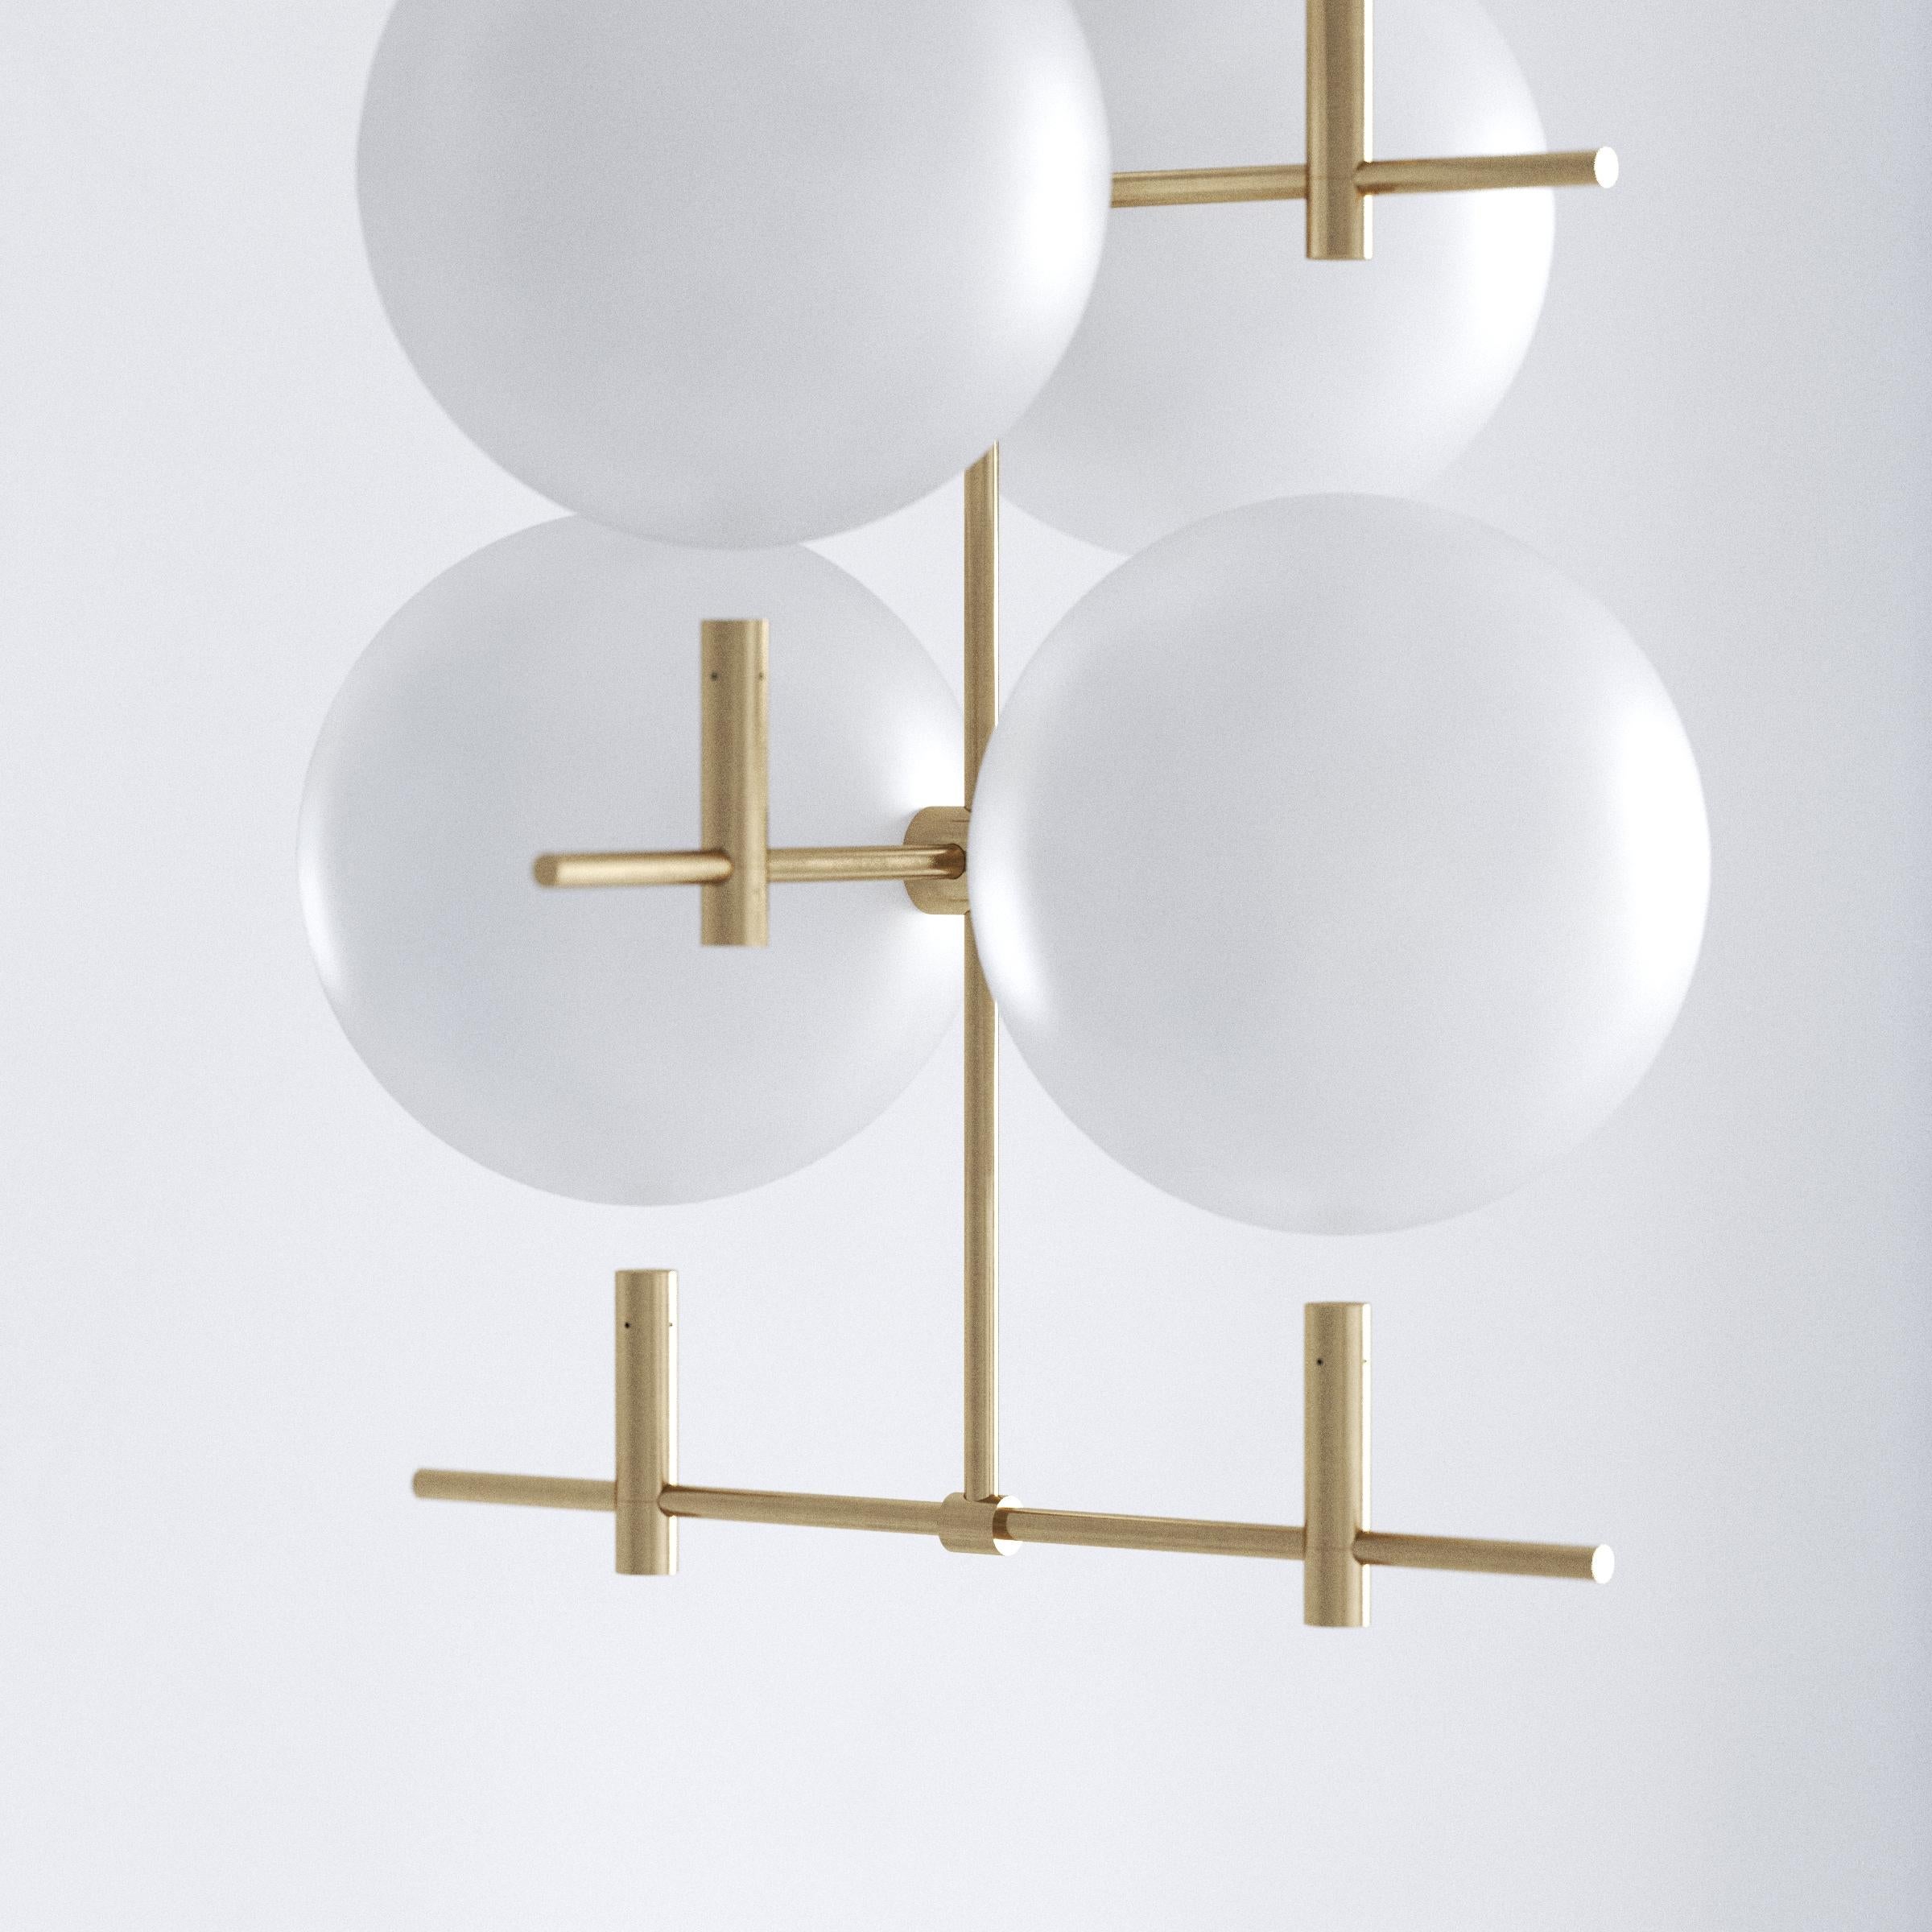 Shifting between day and night, this moody luminaire contrasts monumental hovering glass spheres and subtle metal construction. Luna offers two lighting options. Sun and Moon. Glow and reflection. Soak up the light and let the spheres illuminate the